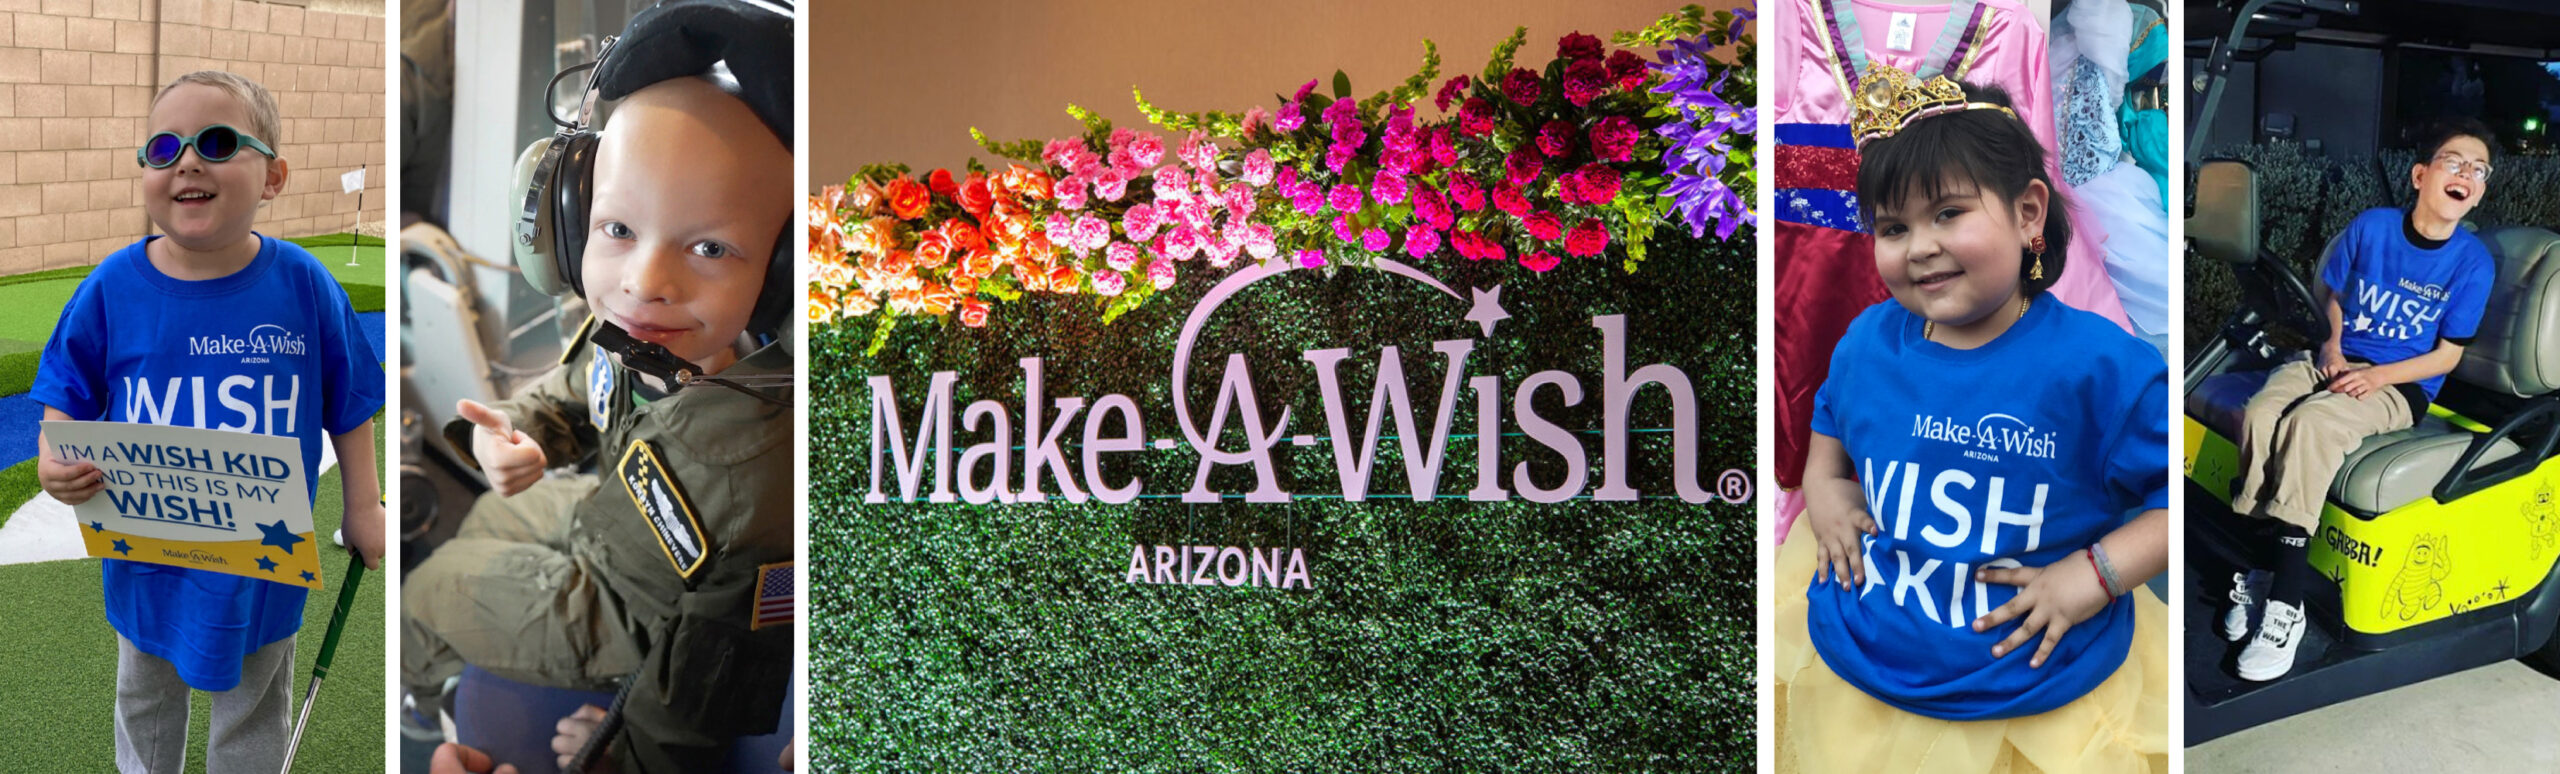 Make-A-Wish Arizona is one of the best!